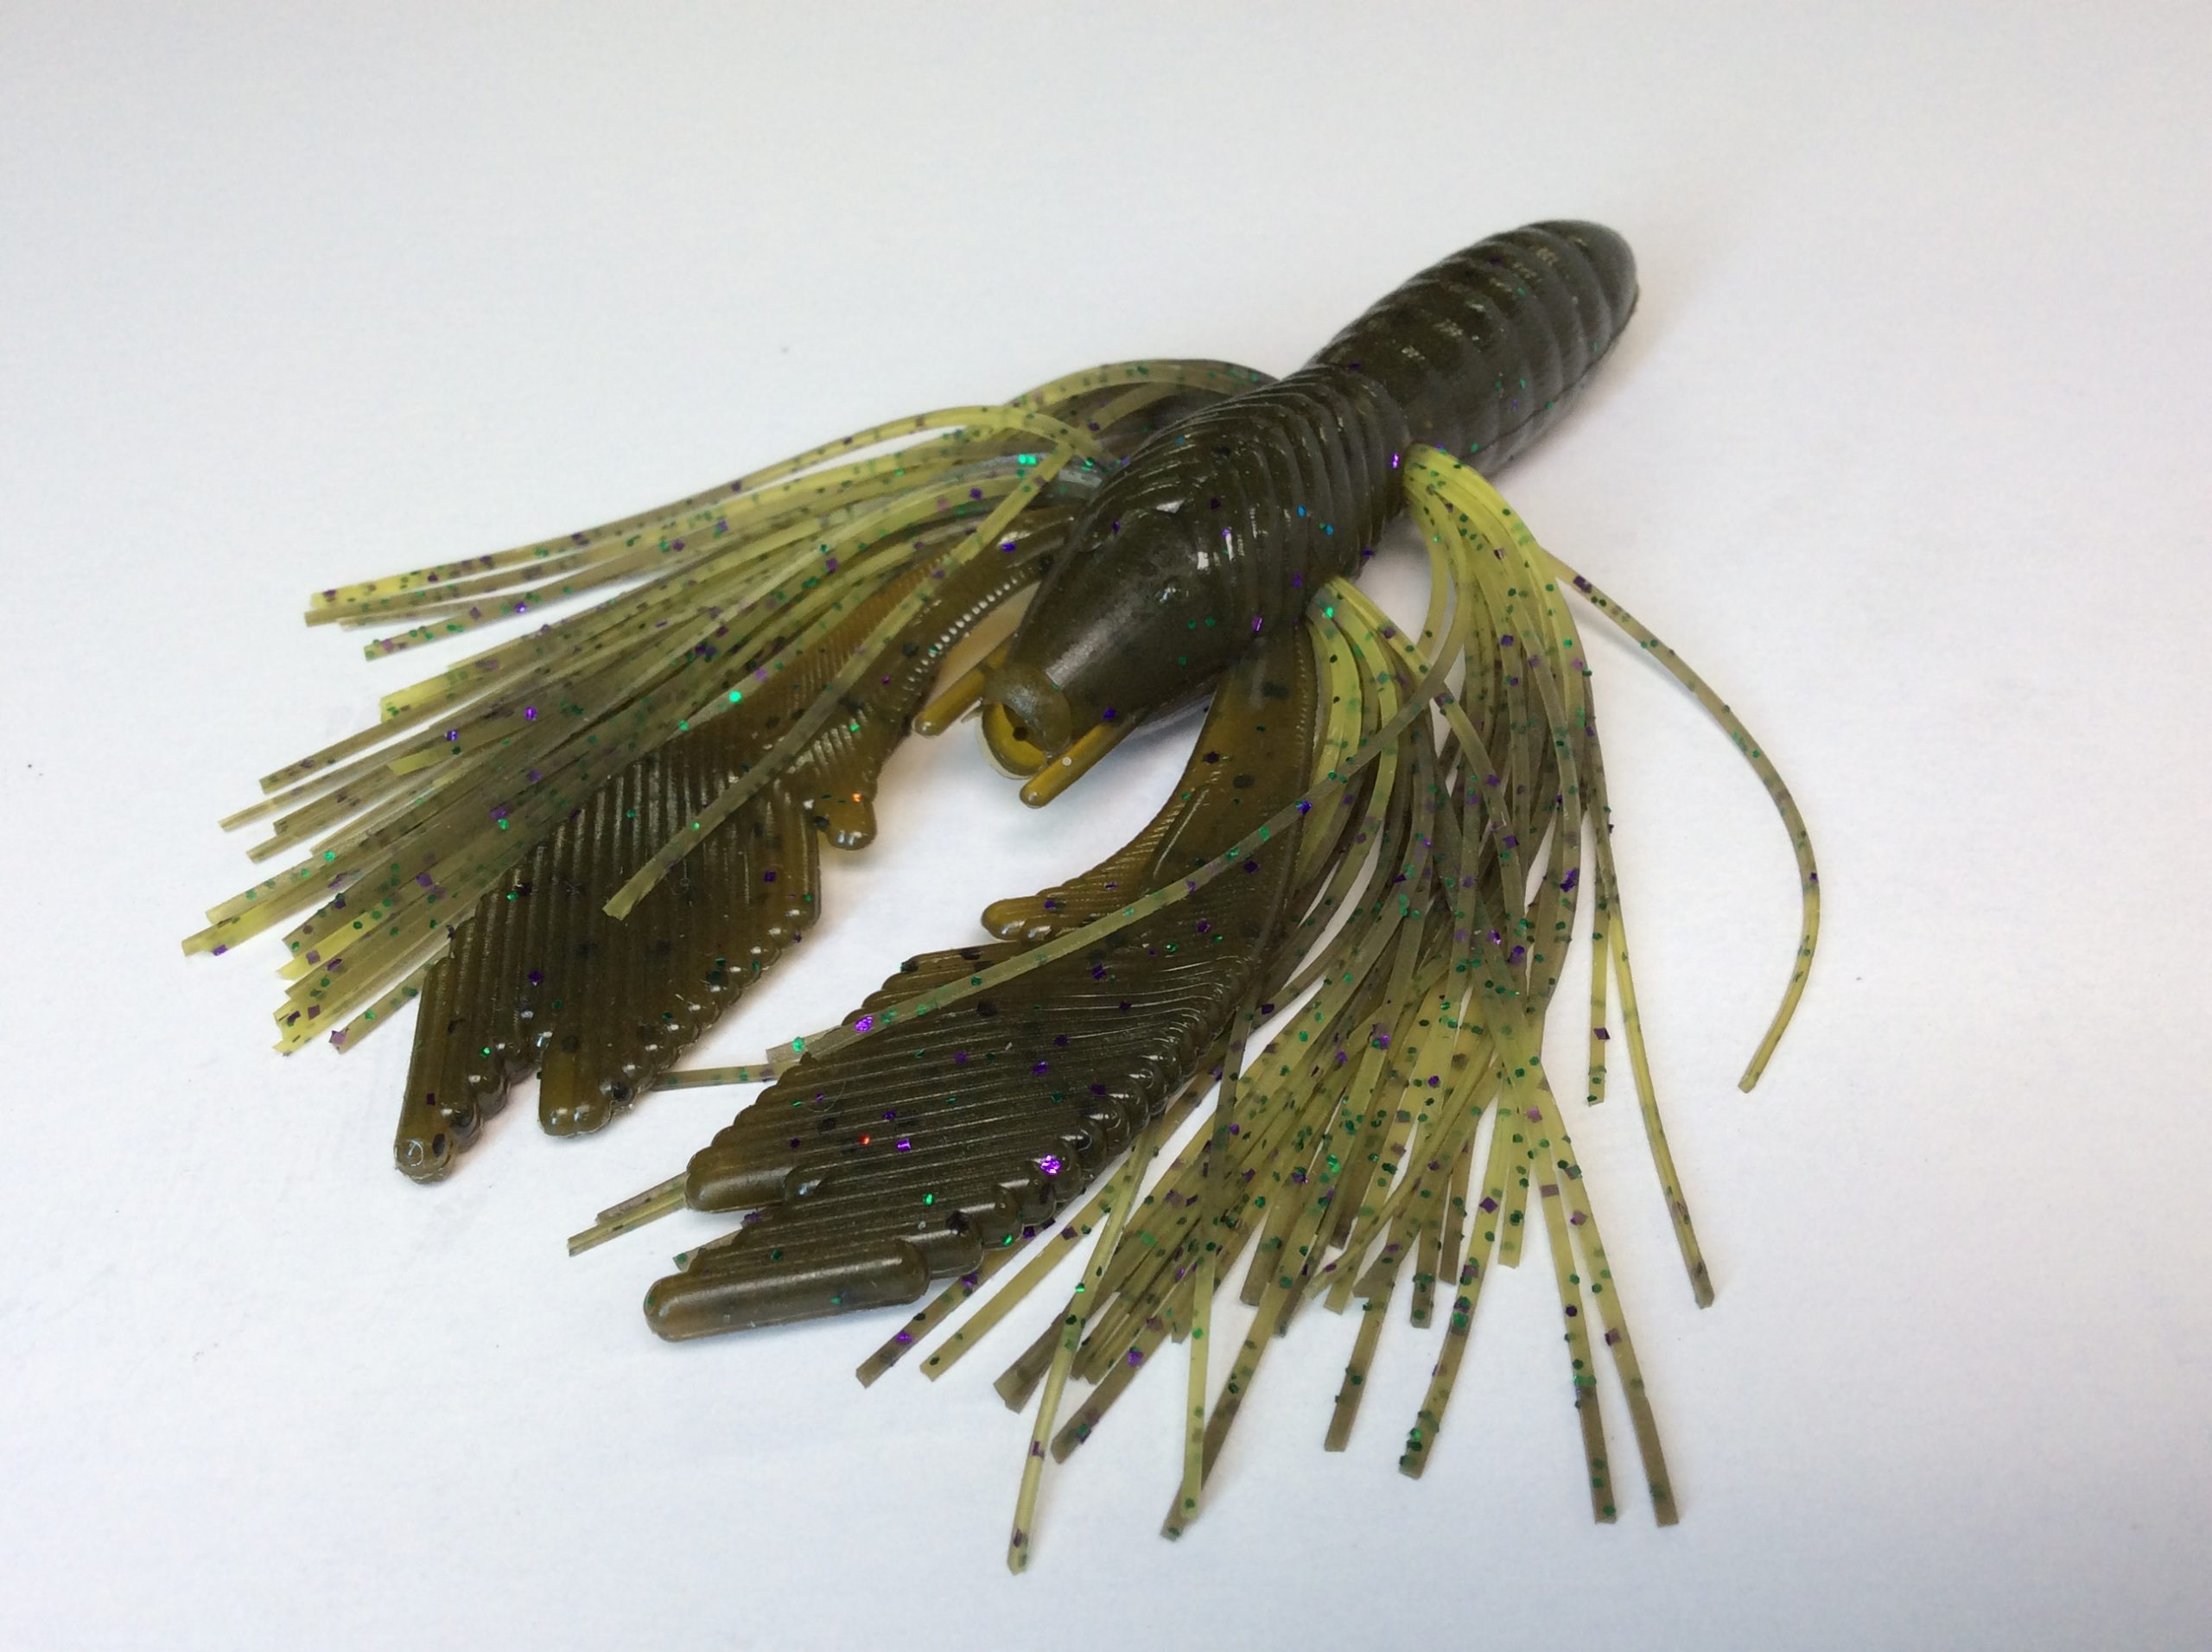 Picasso Lures - Finesse Bait Ball Extreme